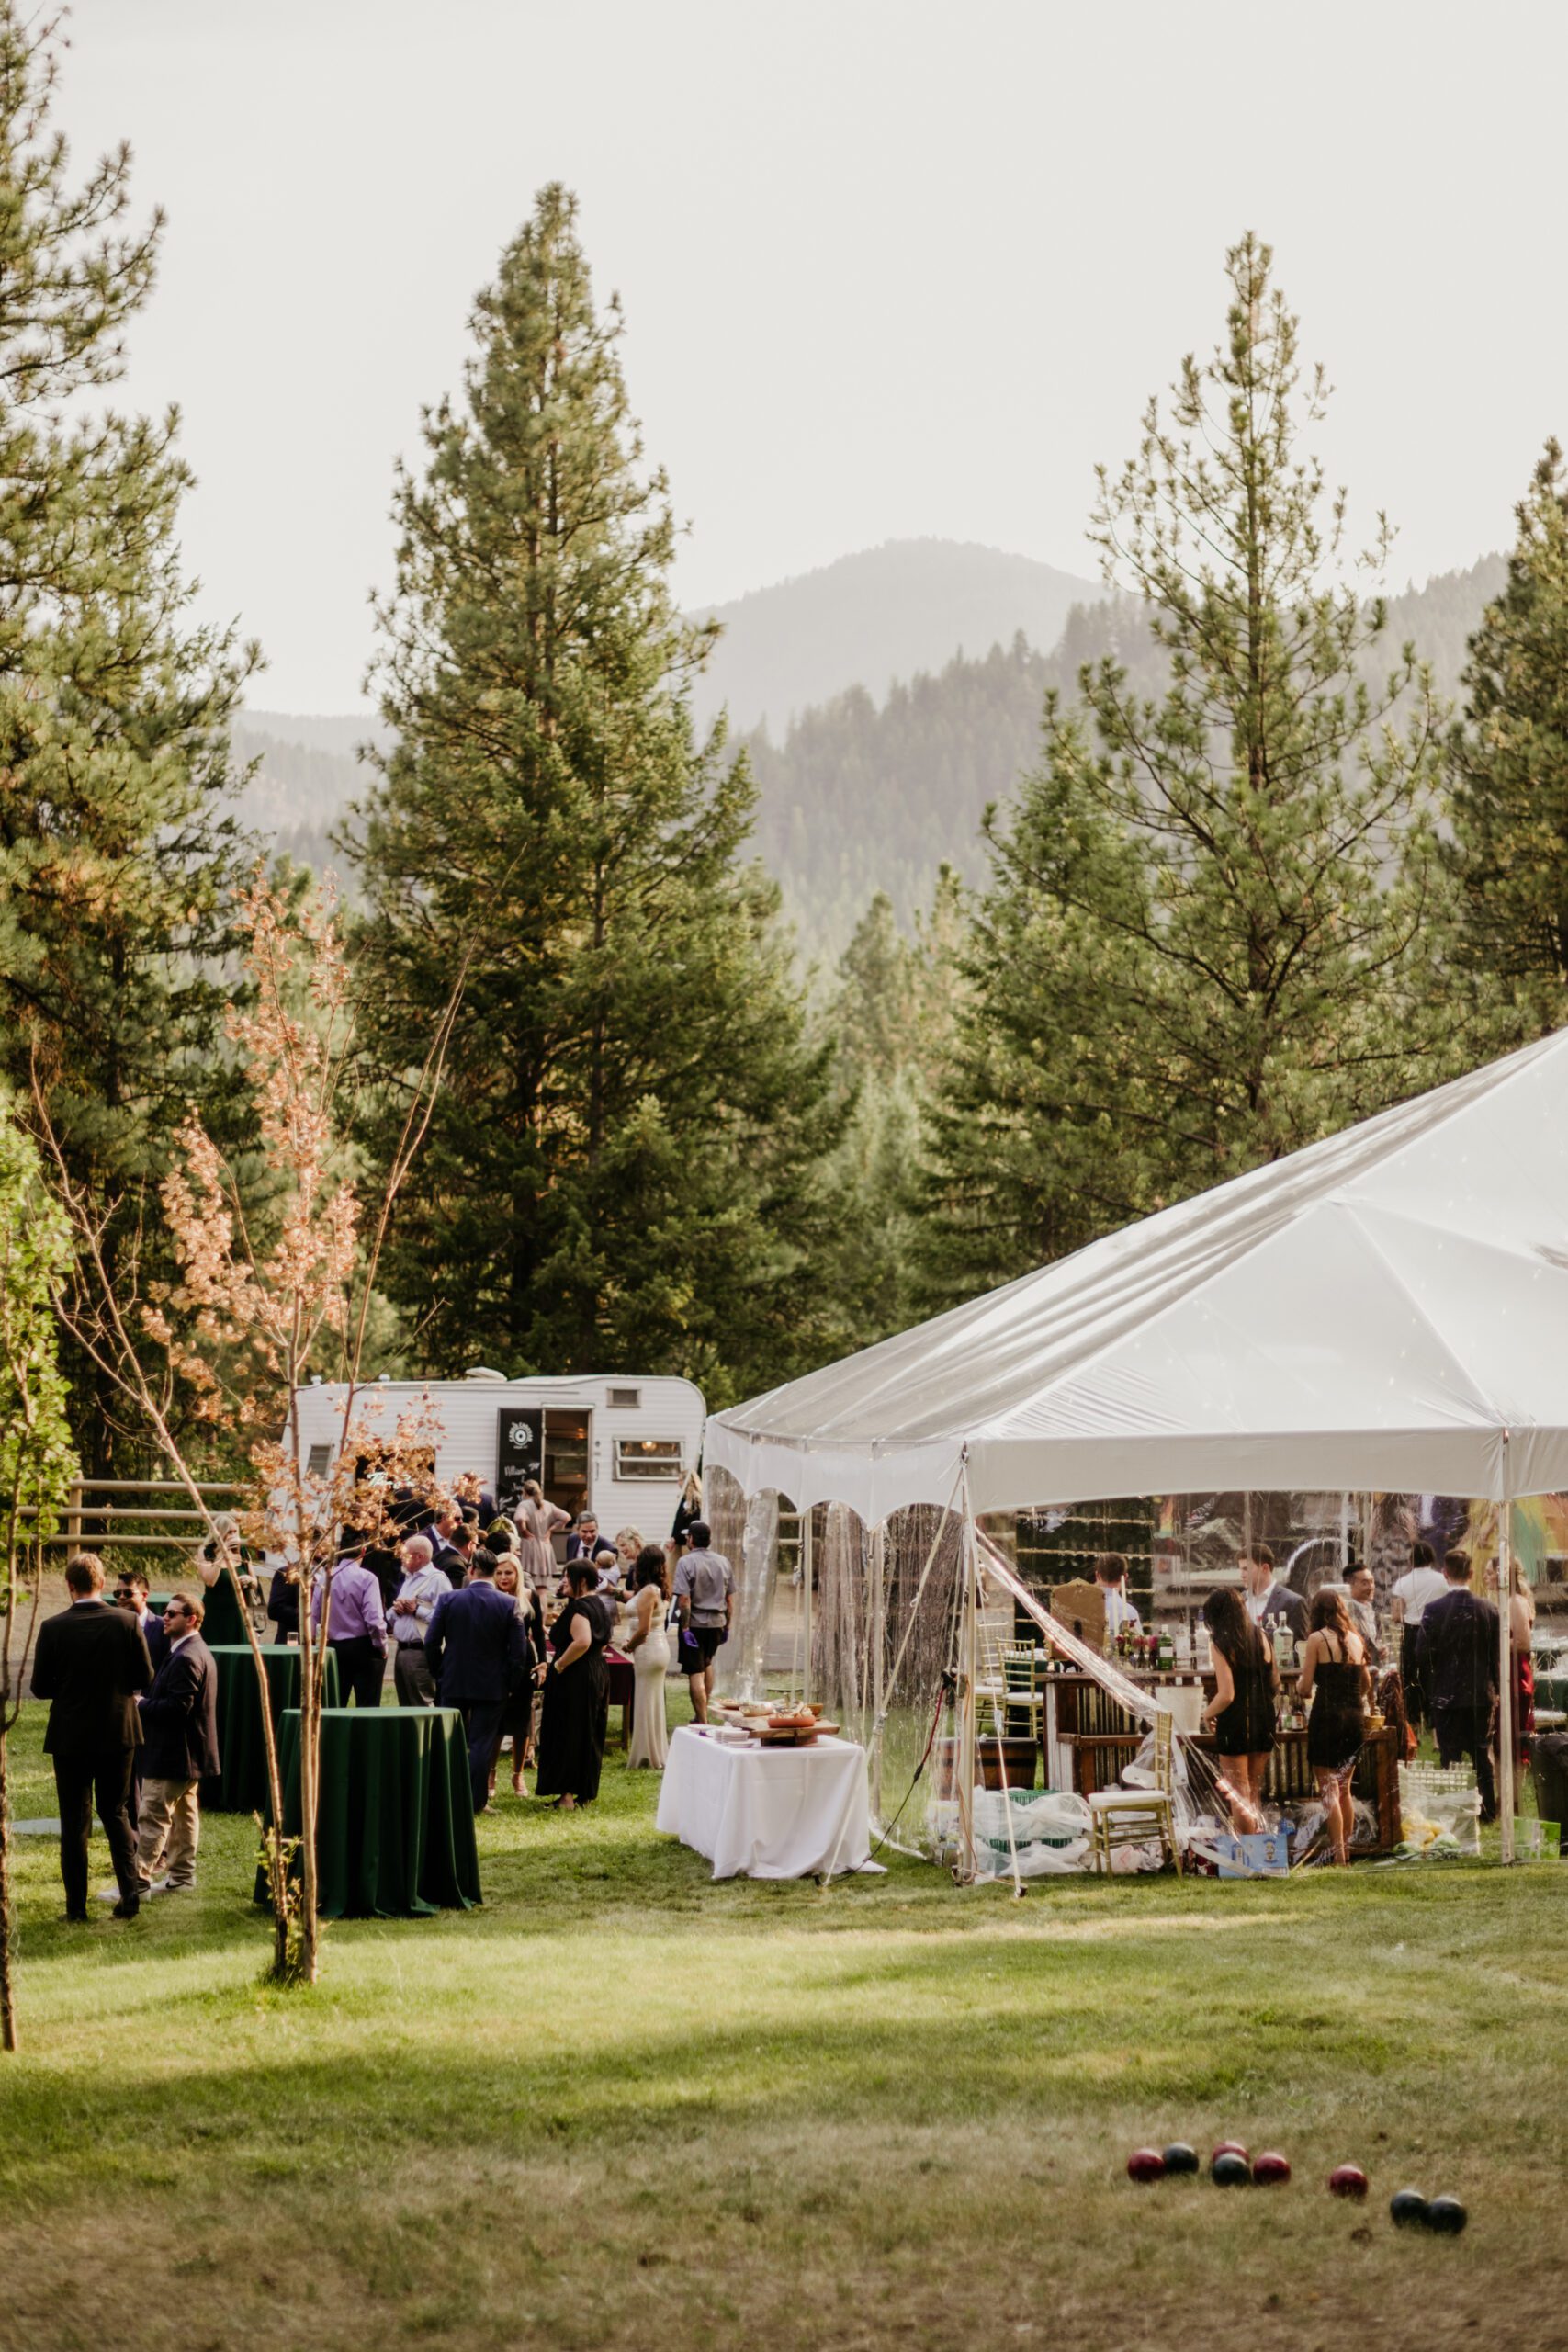 Clear top tent wedding in the mountains.Western Montana luxury wedding.  Emerald greens + burgundy details dress up the Montana mountains. Alpine Falls Ranch wedding checks all the boxes for a destination wedding.